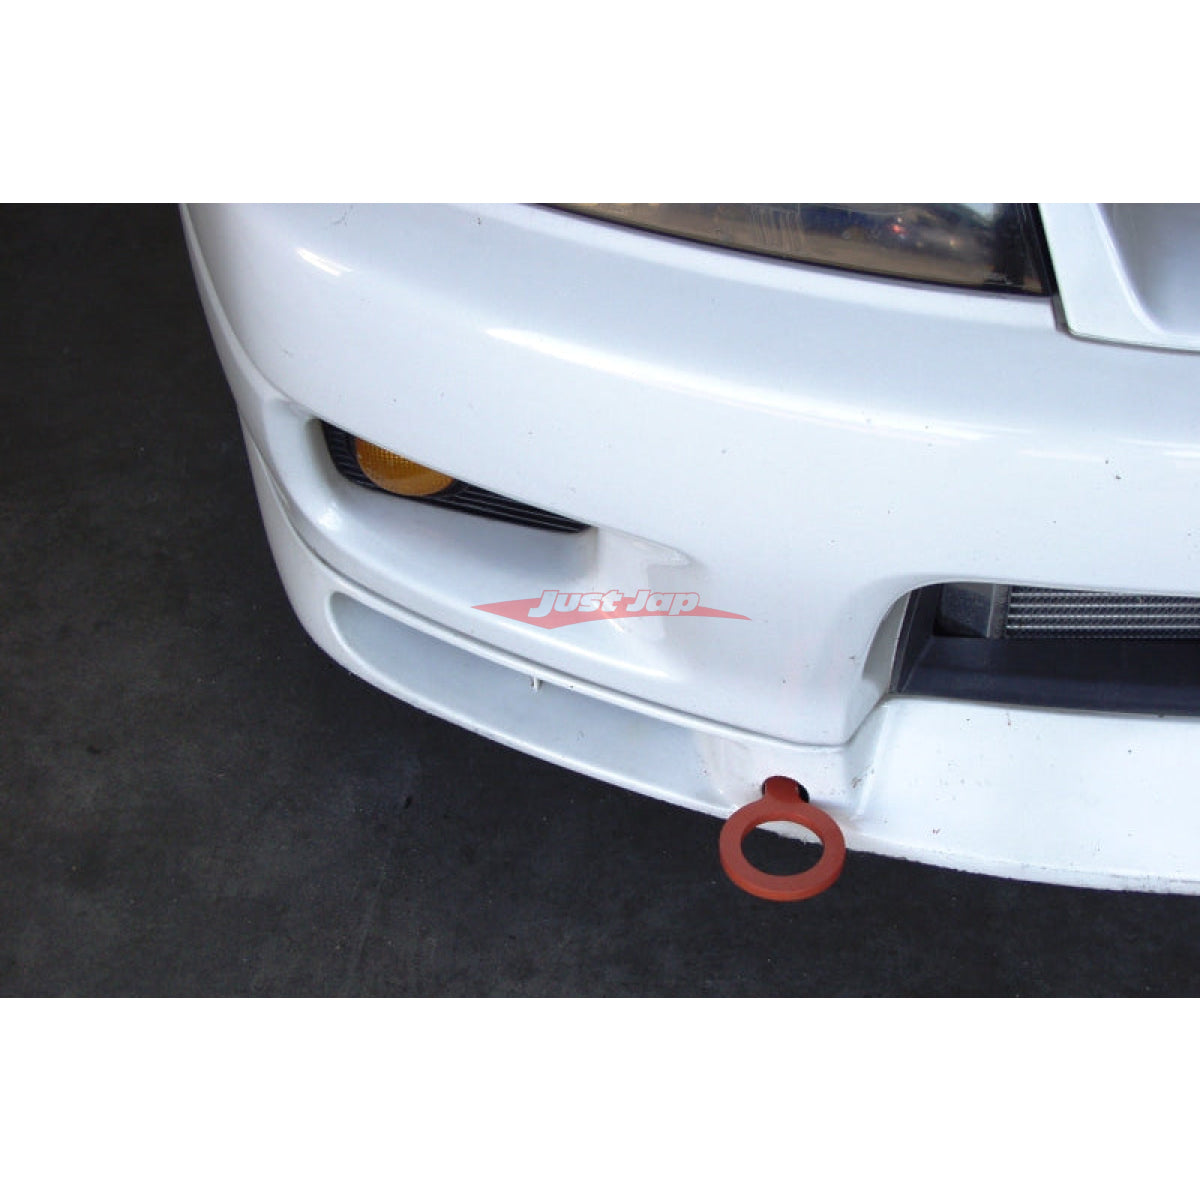 HKS Kansai Service Front Tow Hook (Fixed Type) Fits Nissan Skyline R33 –  Just Jap